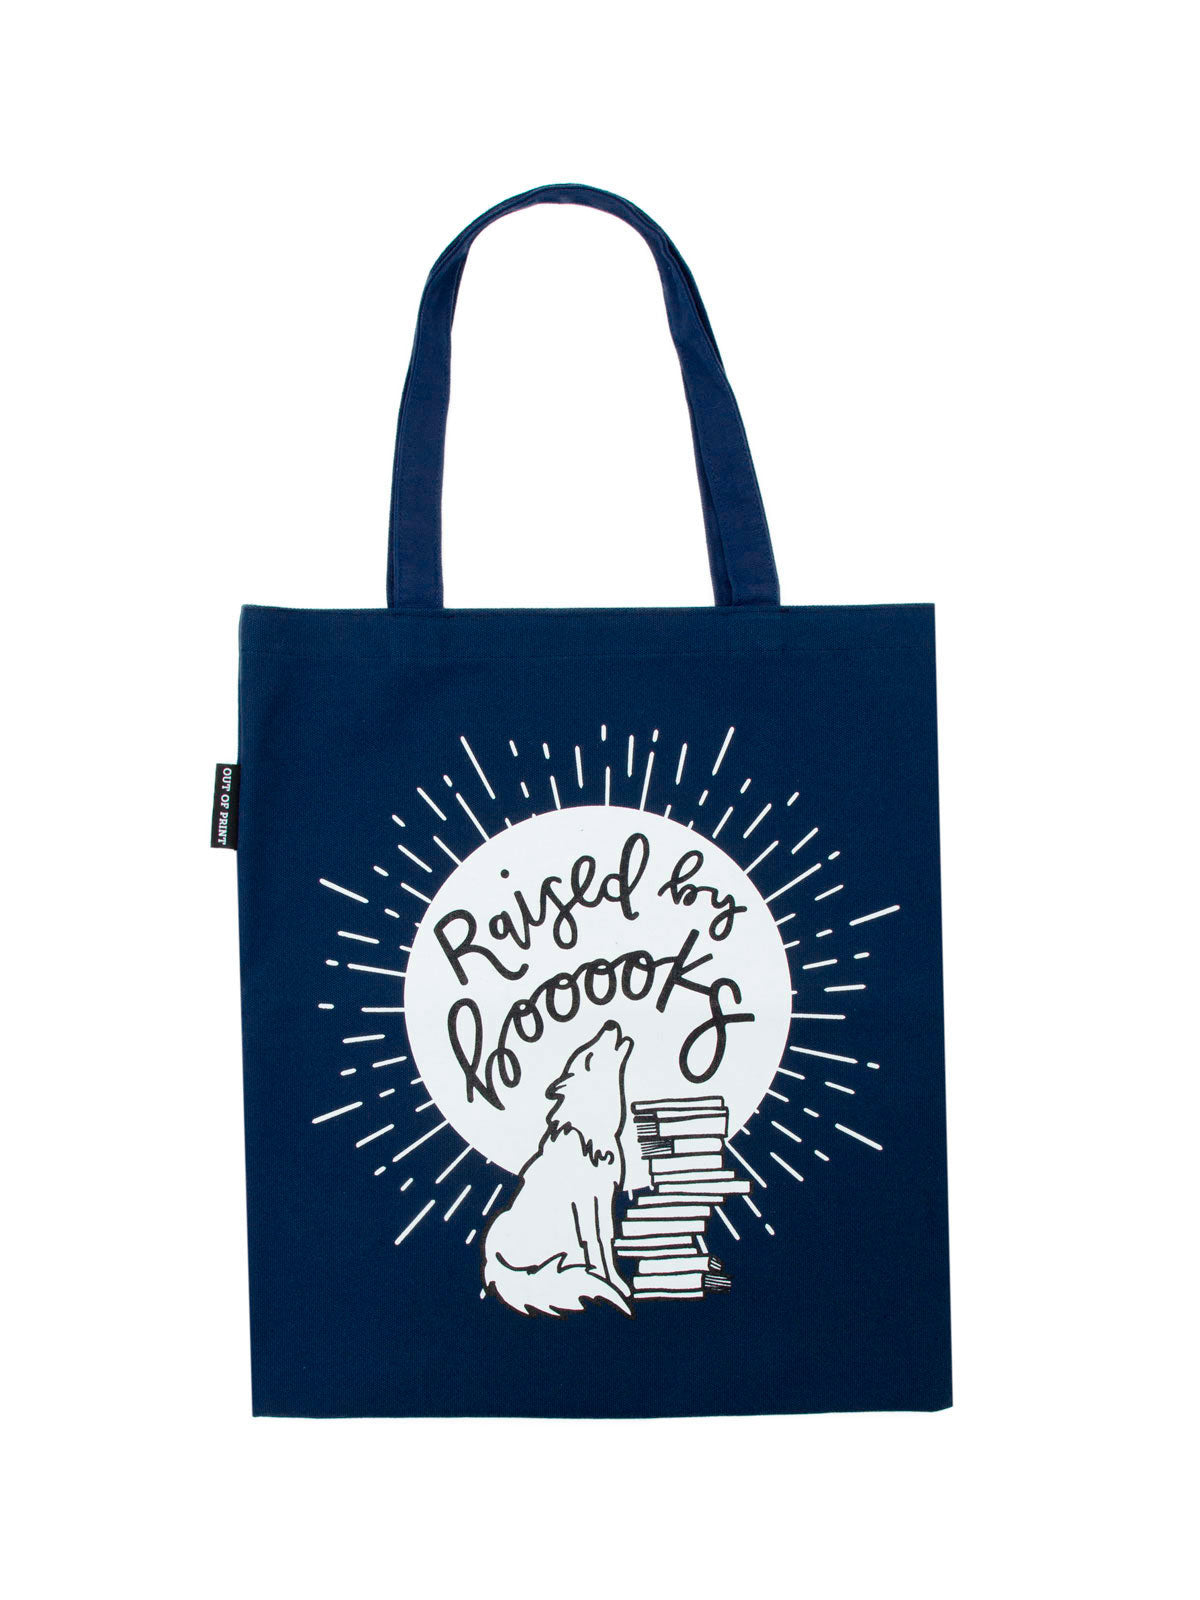 Little Golden Books tote bag — Out of Print